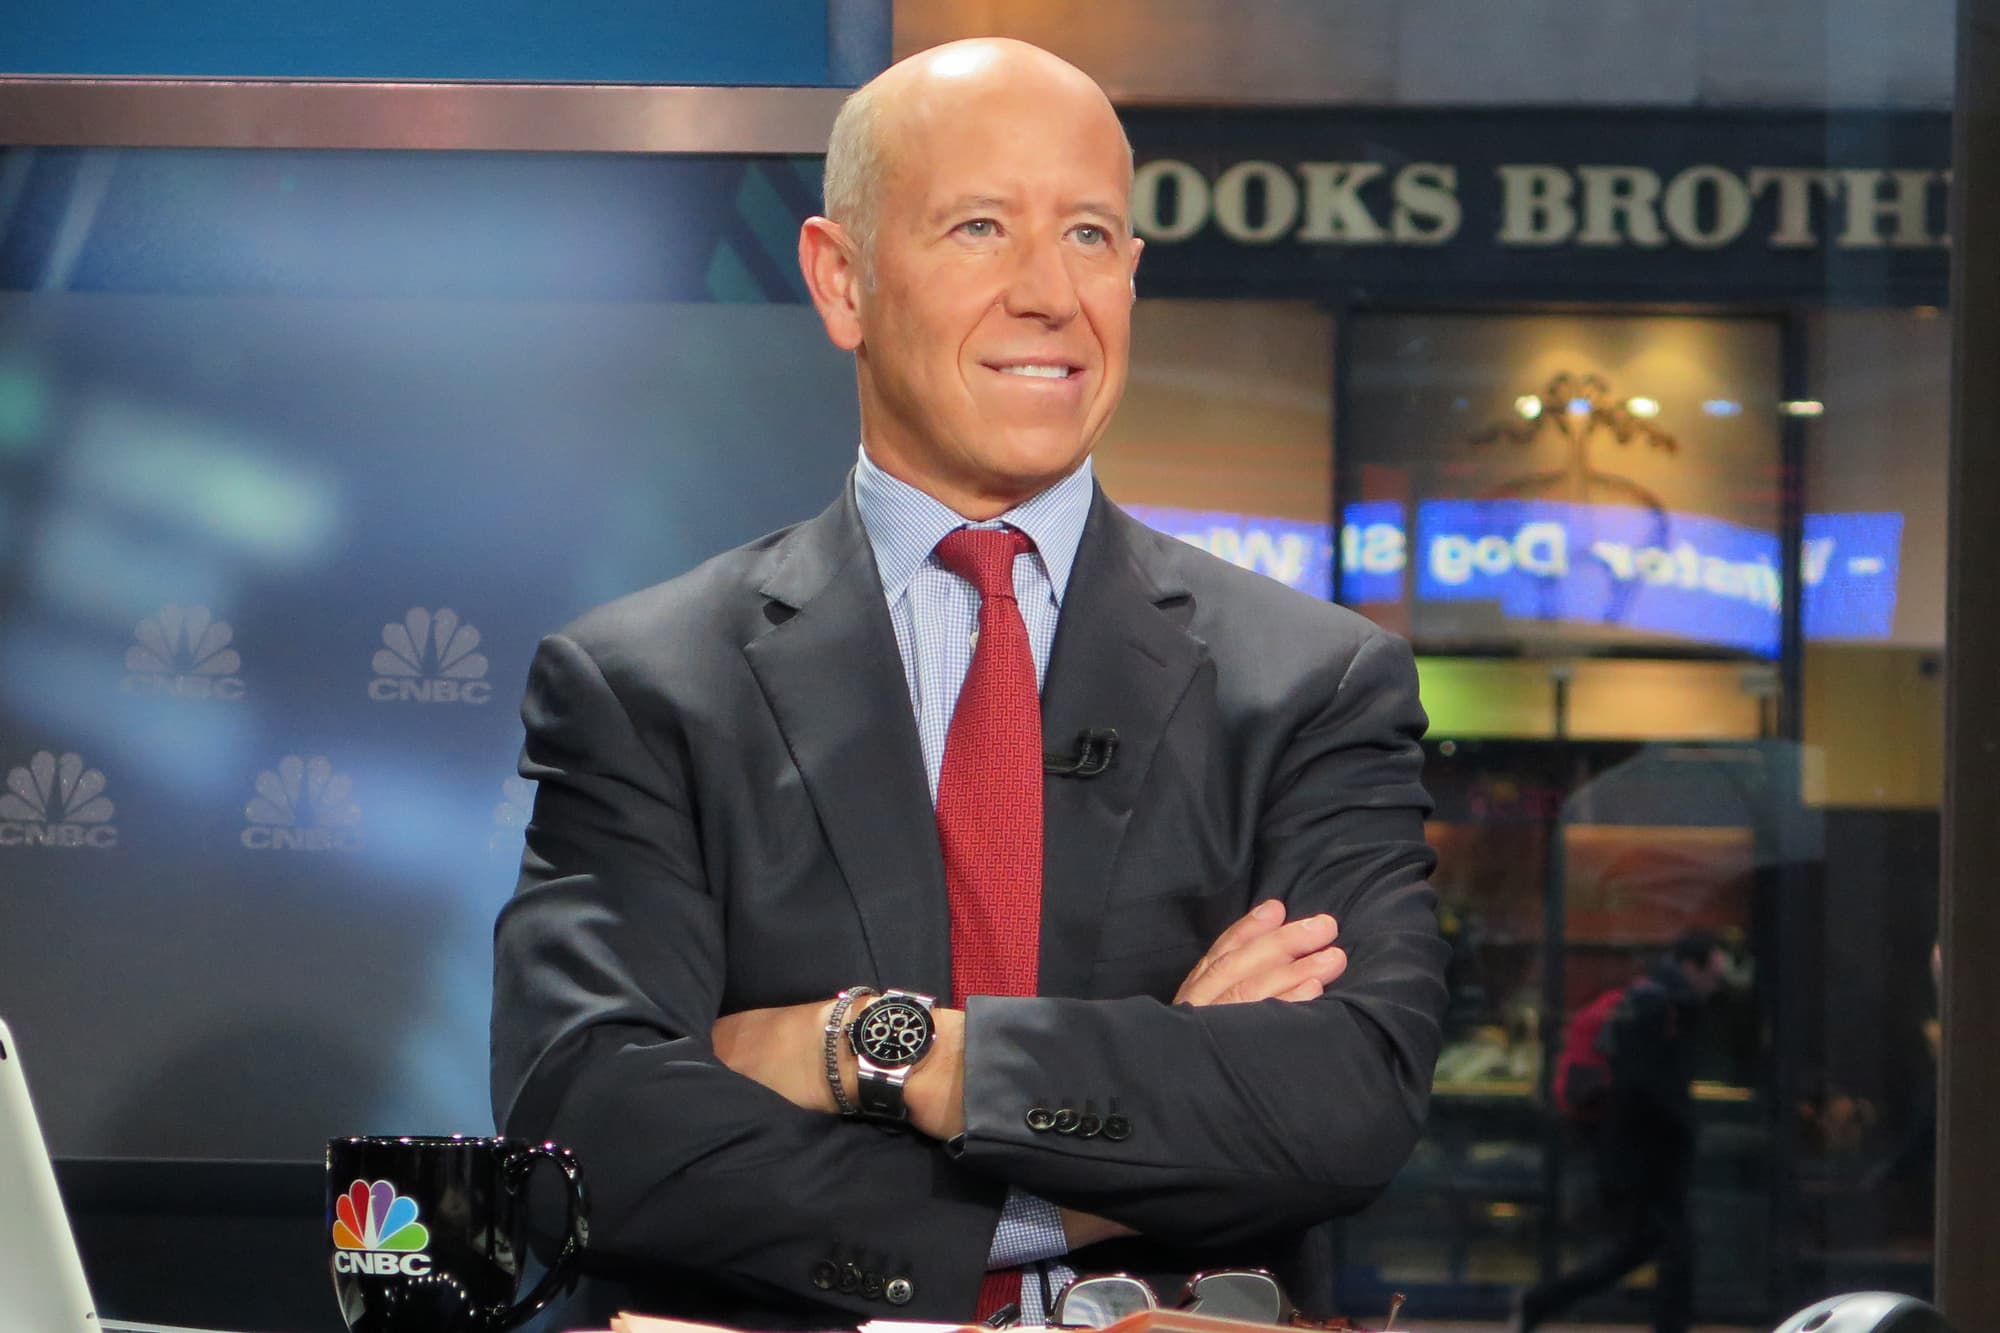 Barry Sternlicht: Stocks tell me 'party is over'